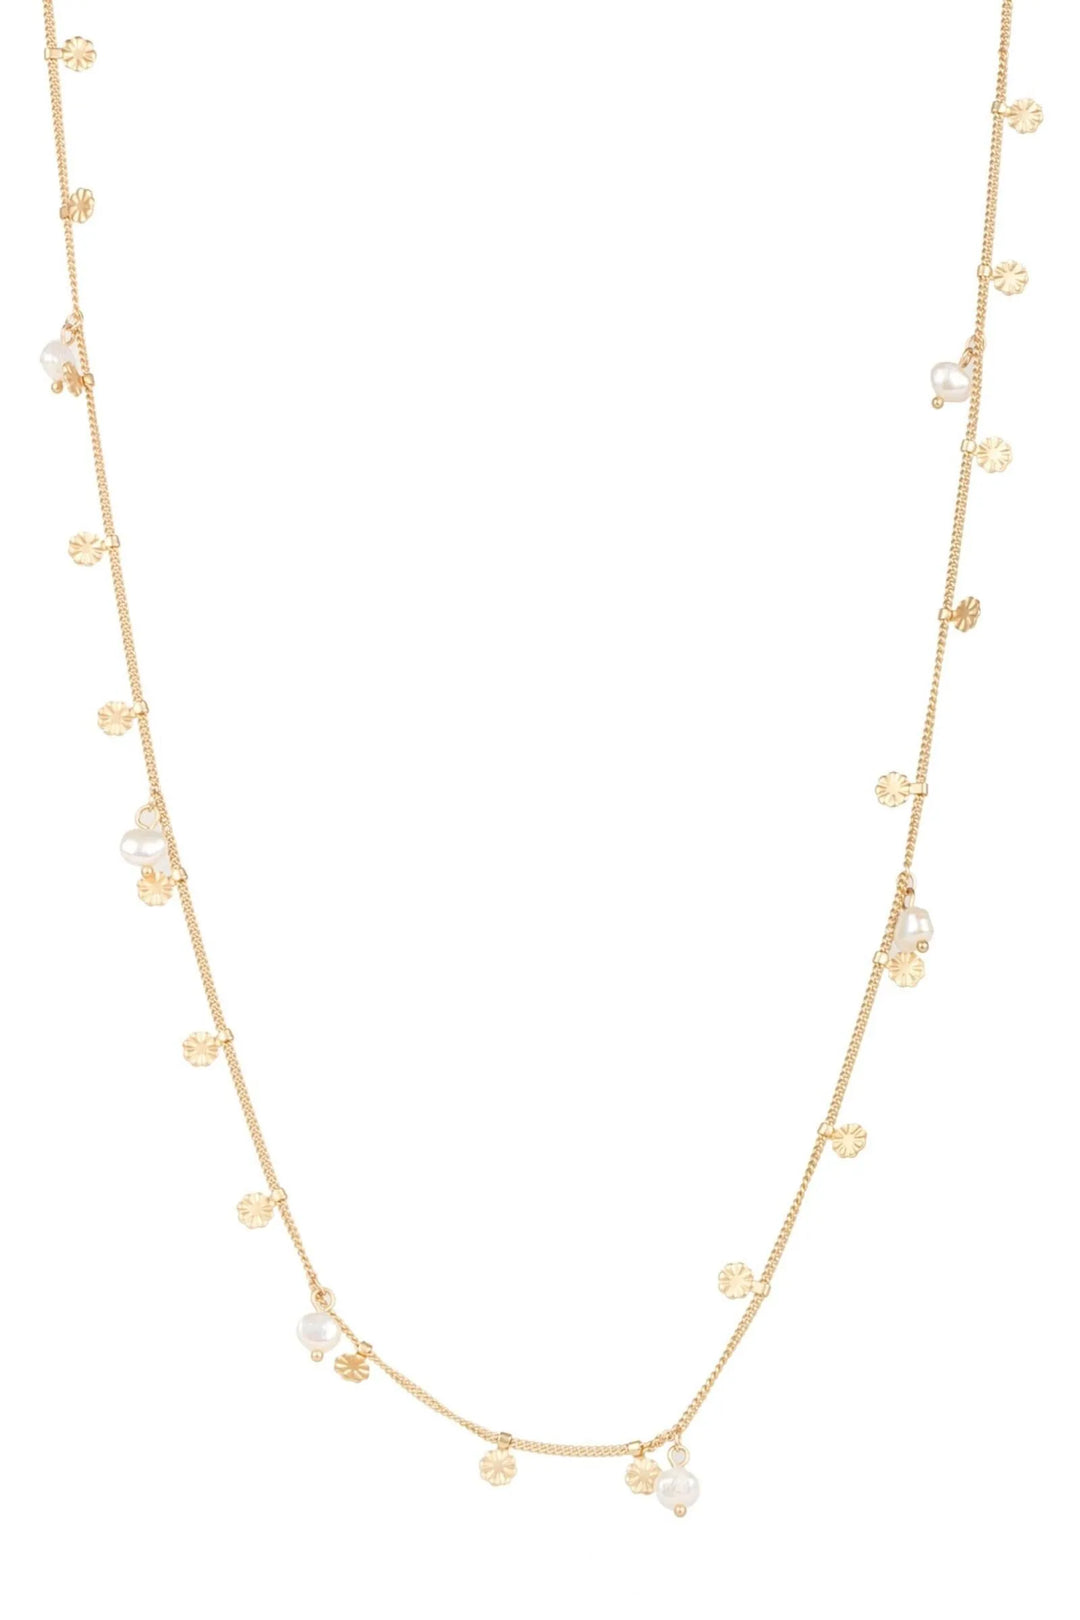 Stellar Pearl Necklace Gold